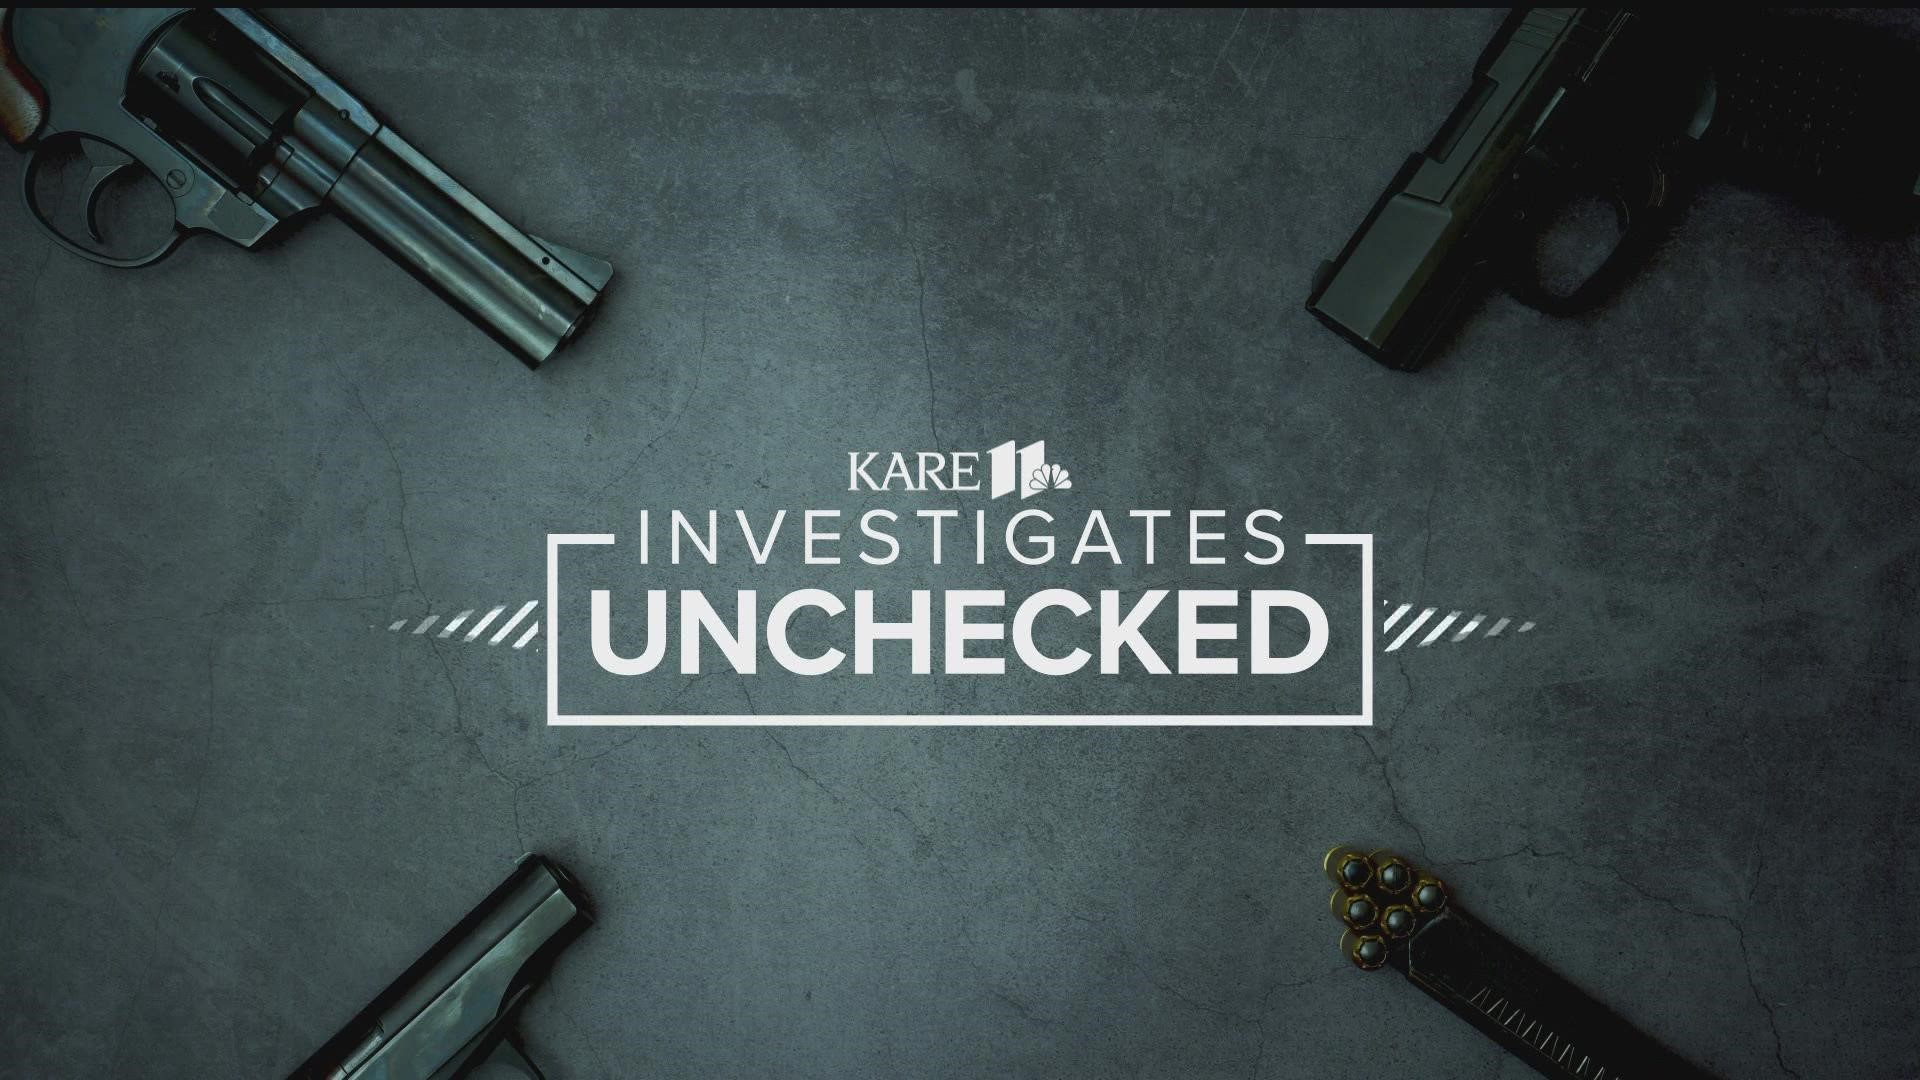 A KARE 11 investigation exposes a major flaw in the nation’s ability to track and recover stolen guns.